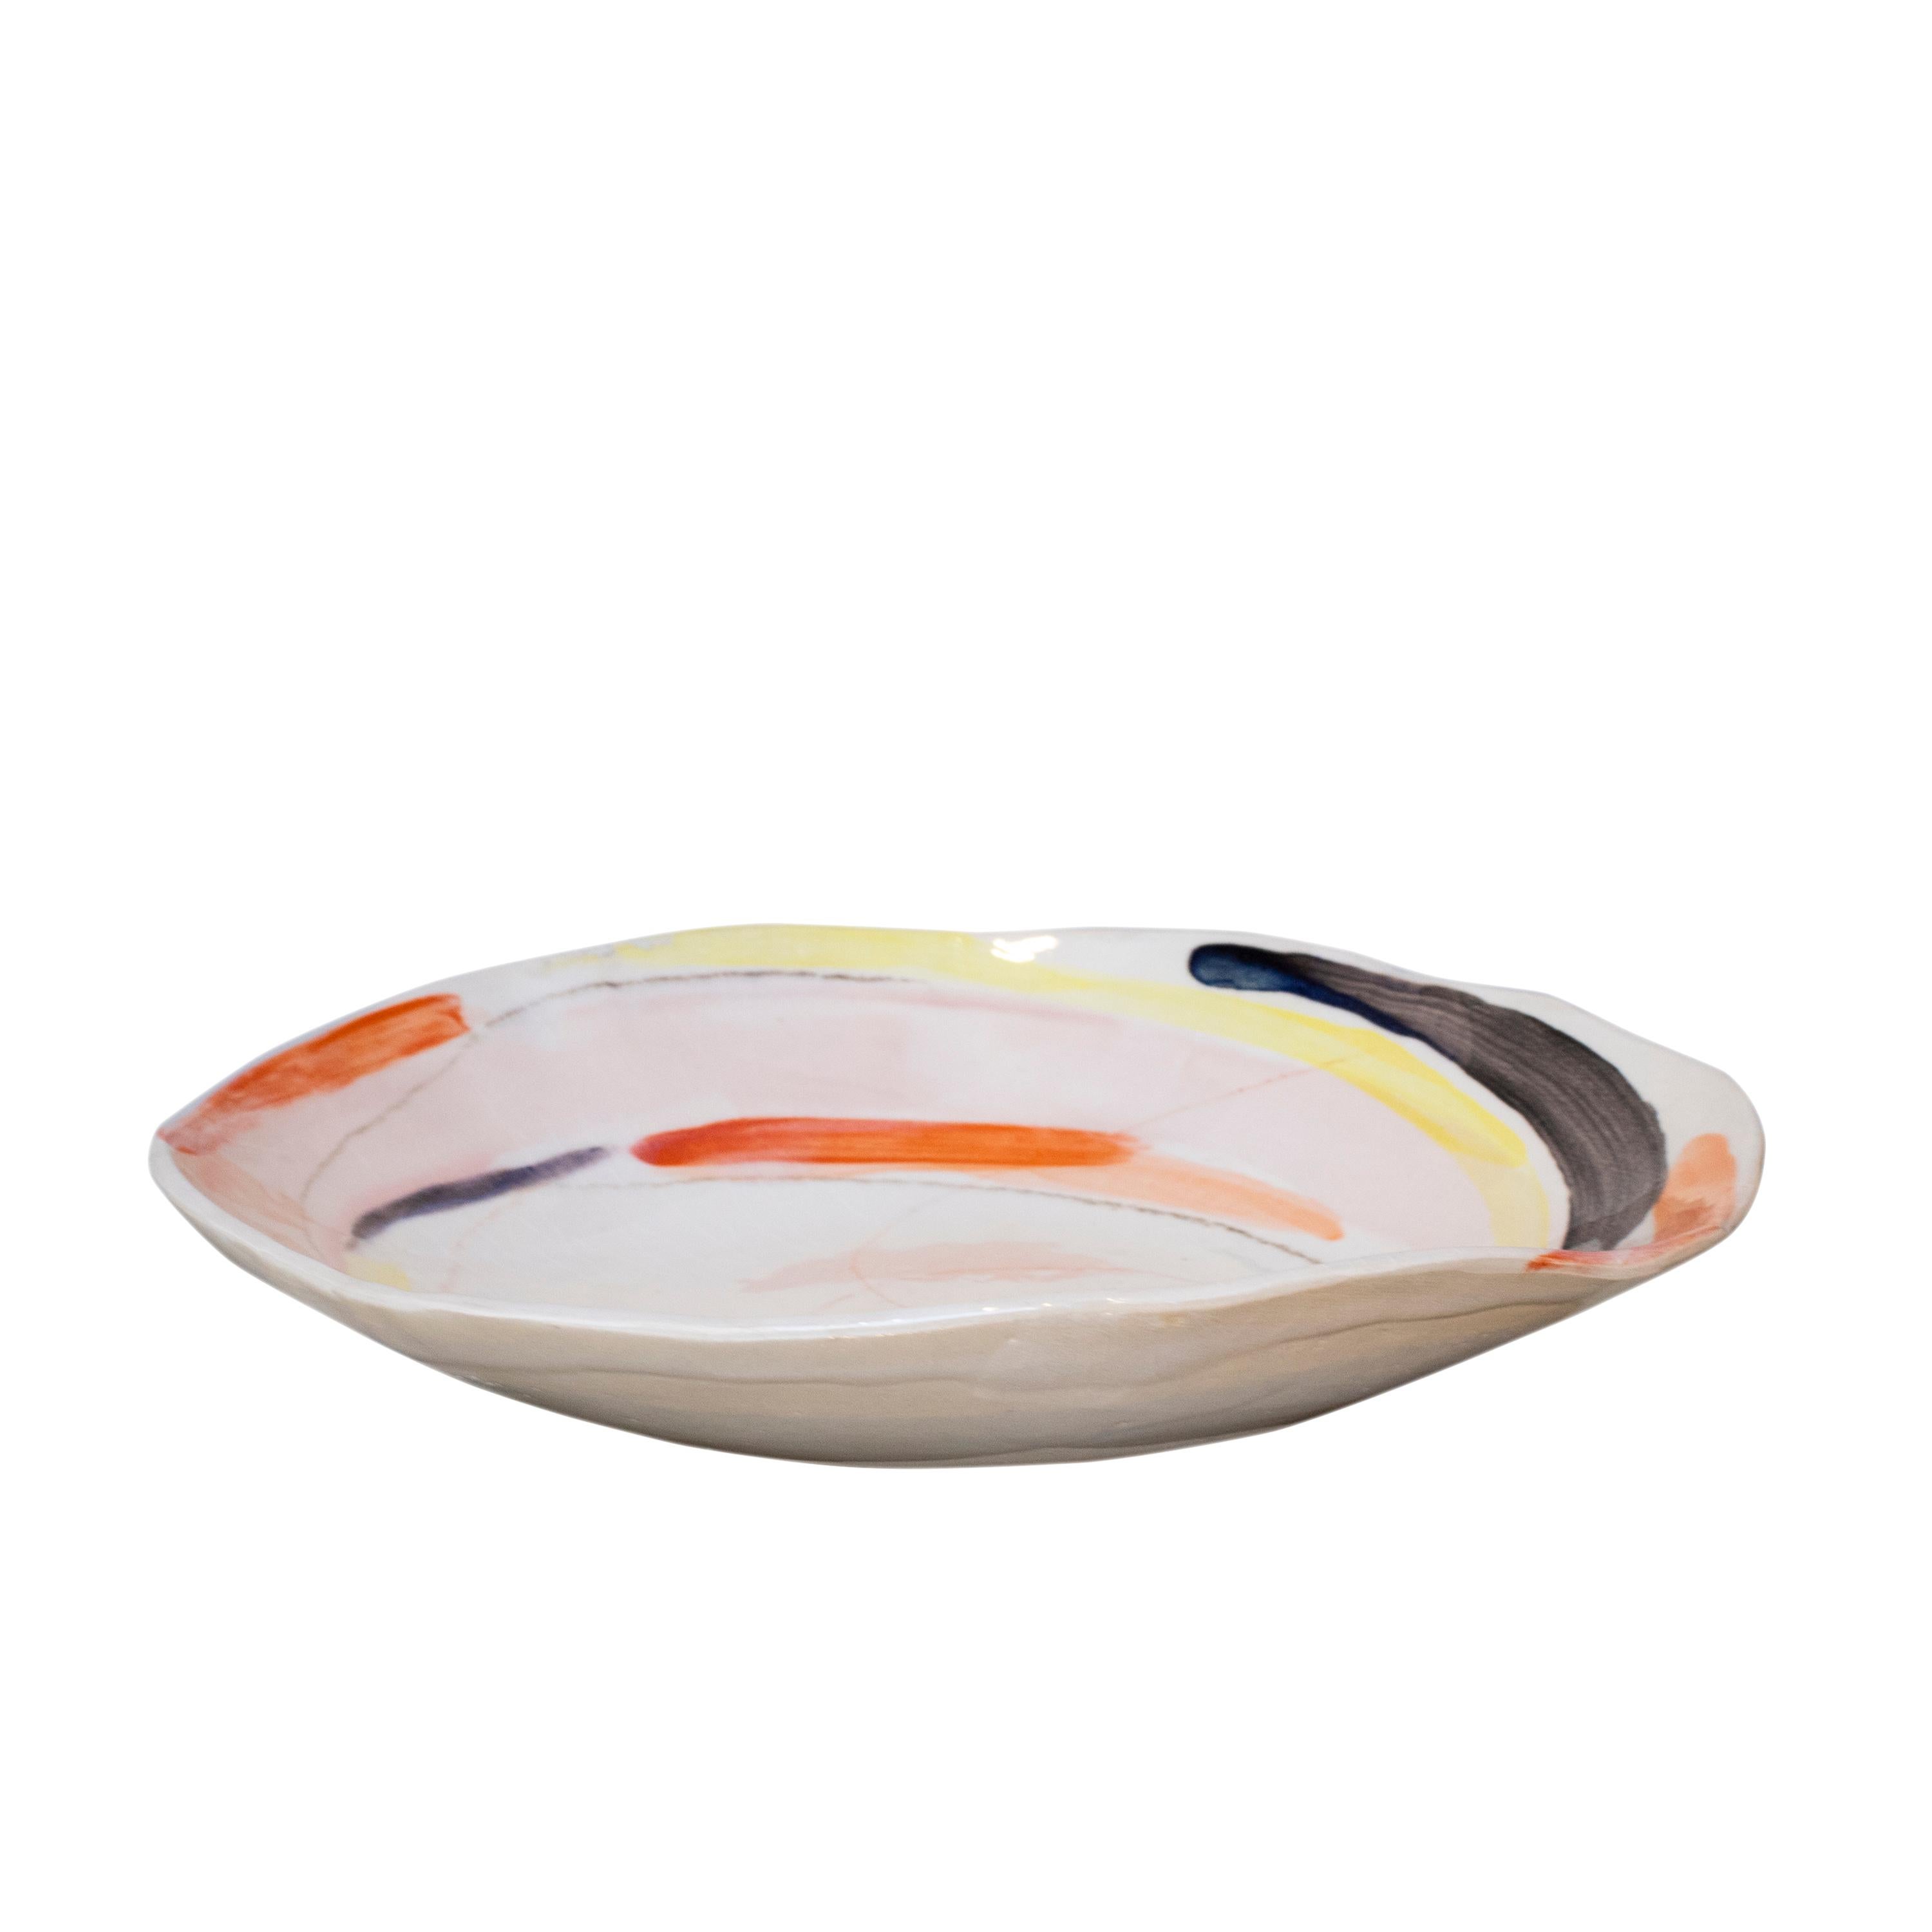 Handcrafted and painted modern platter designed by Spanish artist Ana Laso.

ANA LASO BAEZA is an artist from Madrid who develops her activity fundamentally as a painter and, for a few years, also as a ceramicist. She trained pictorially at the